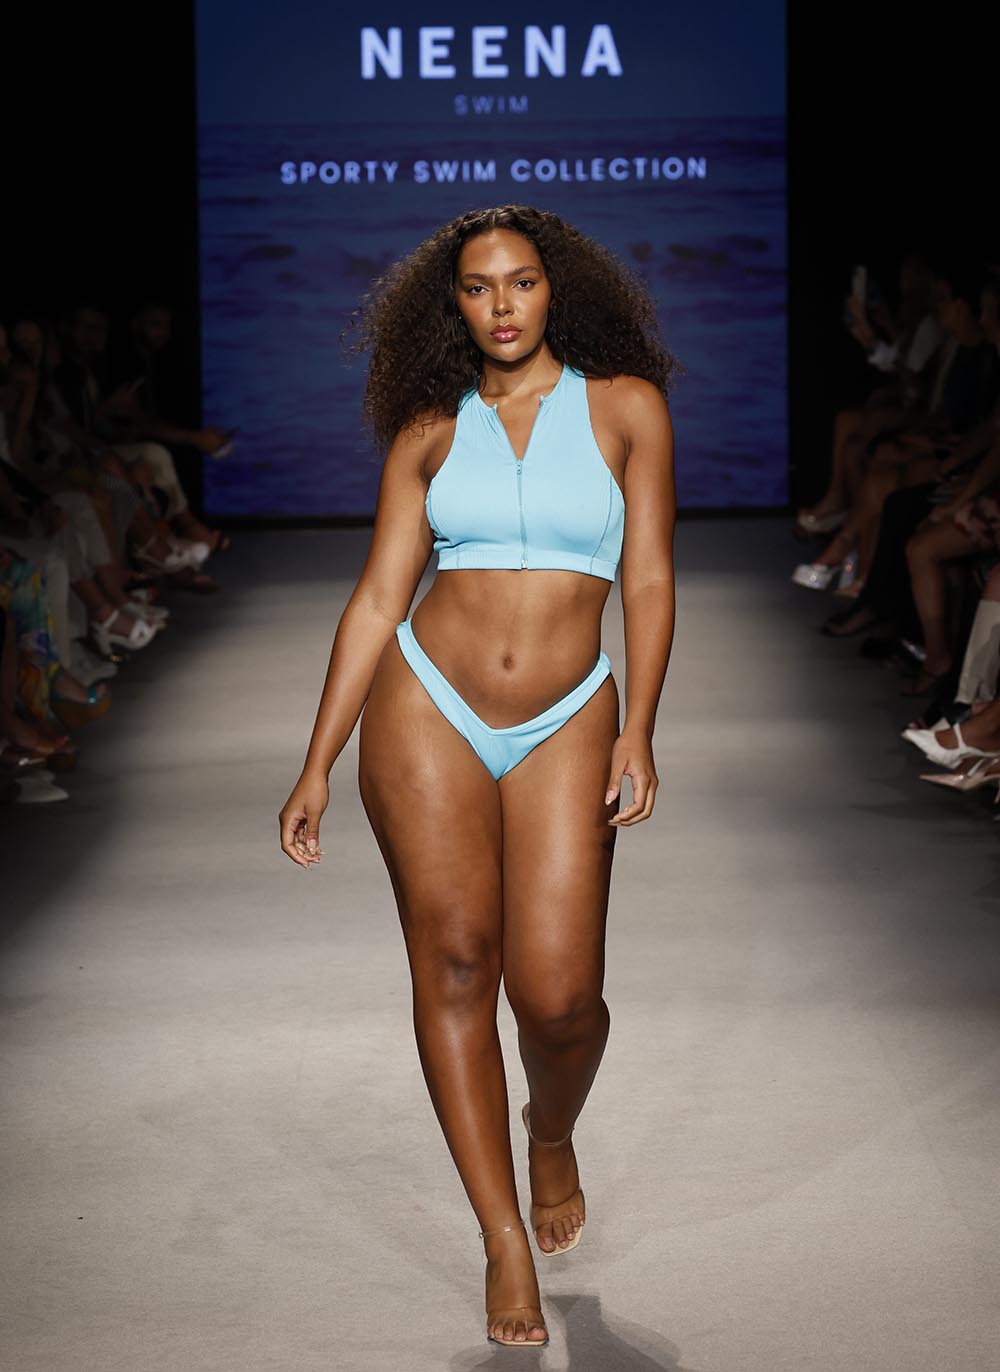 This week Oh Polly put black and plus-size models in an Instagram